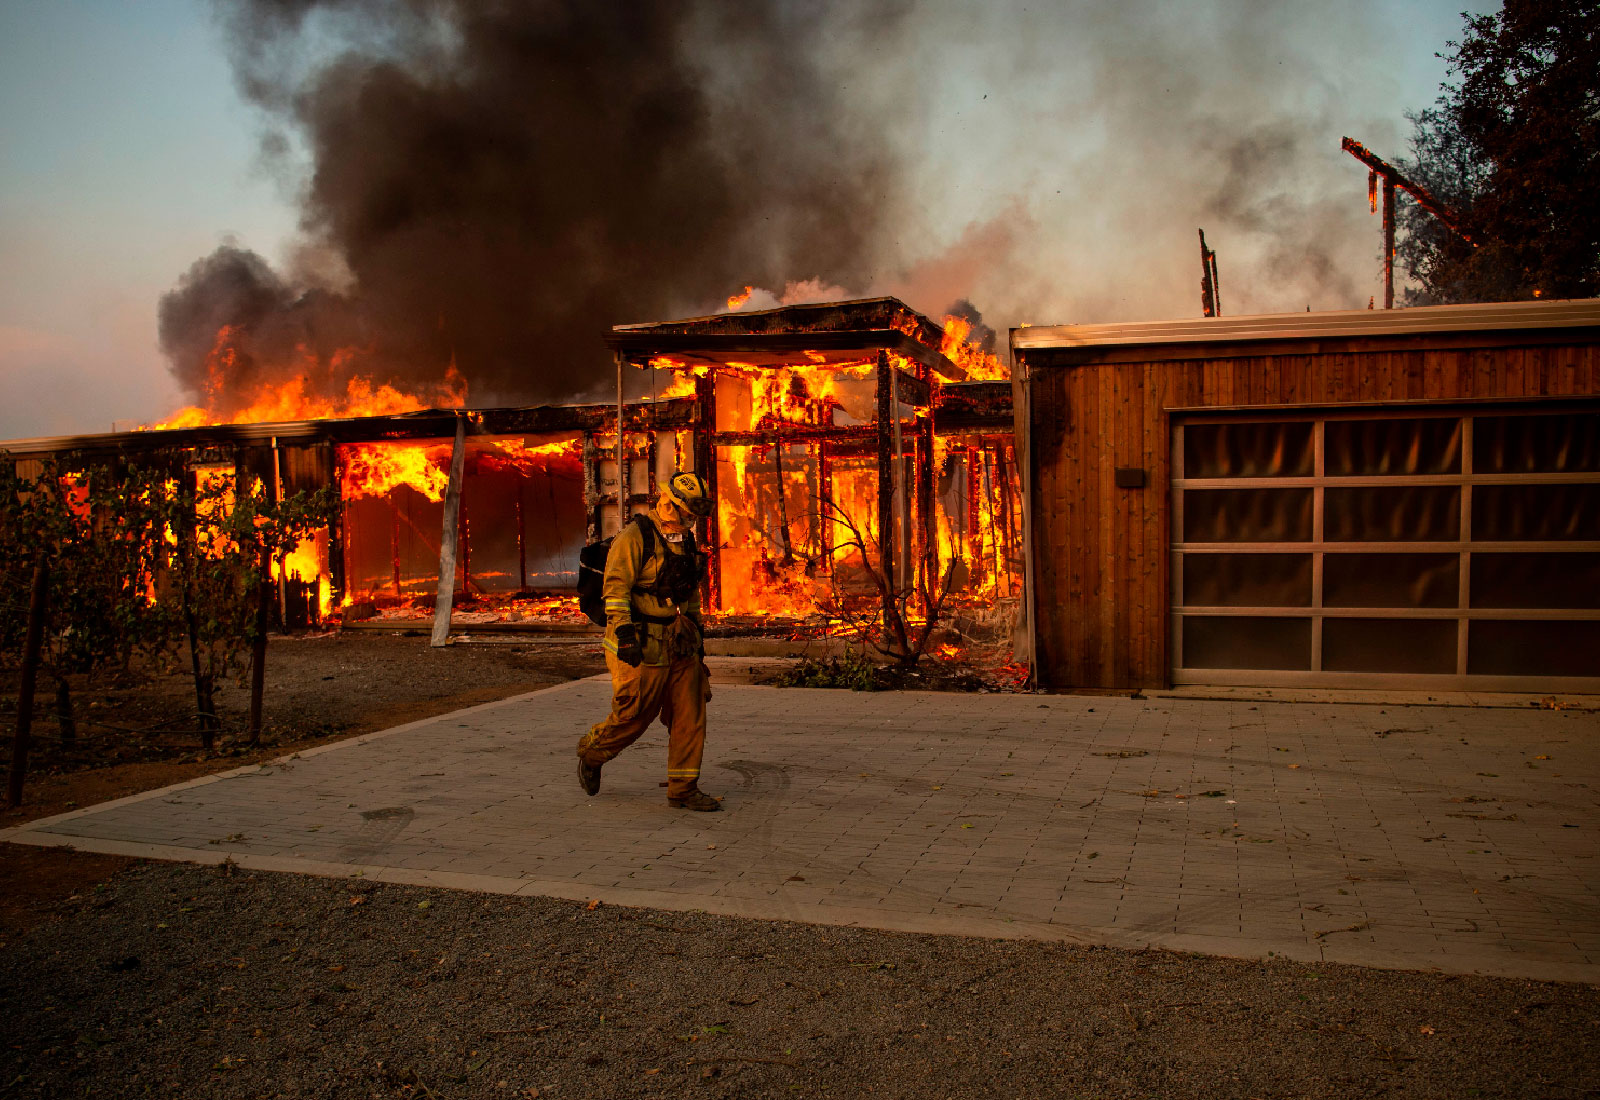 A firefighter walks past a burning house